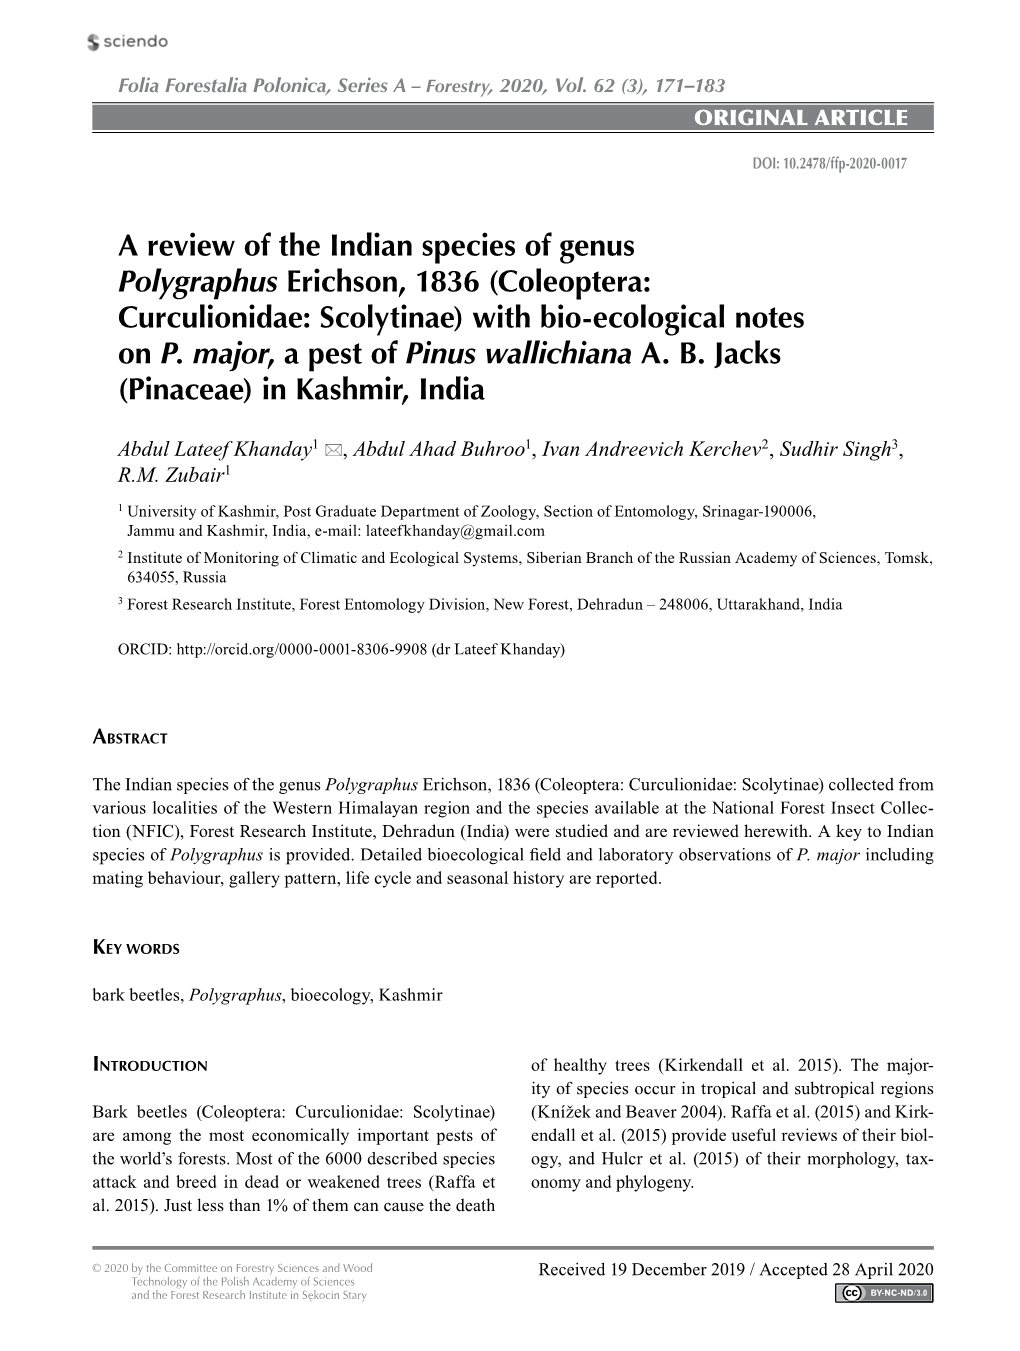 A Review of the Indian Species of Genus Polygraphus Erichson, 1836 (Coleoptera: Curculionidae: Scolytinae) with Bio-Ecological Notes on P